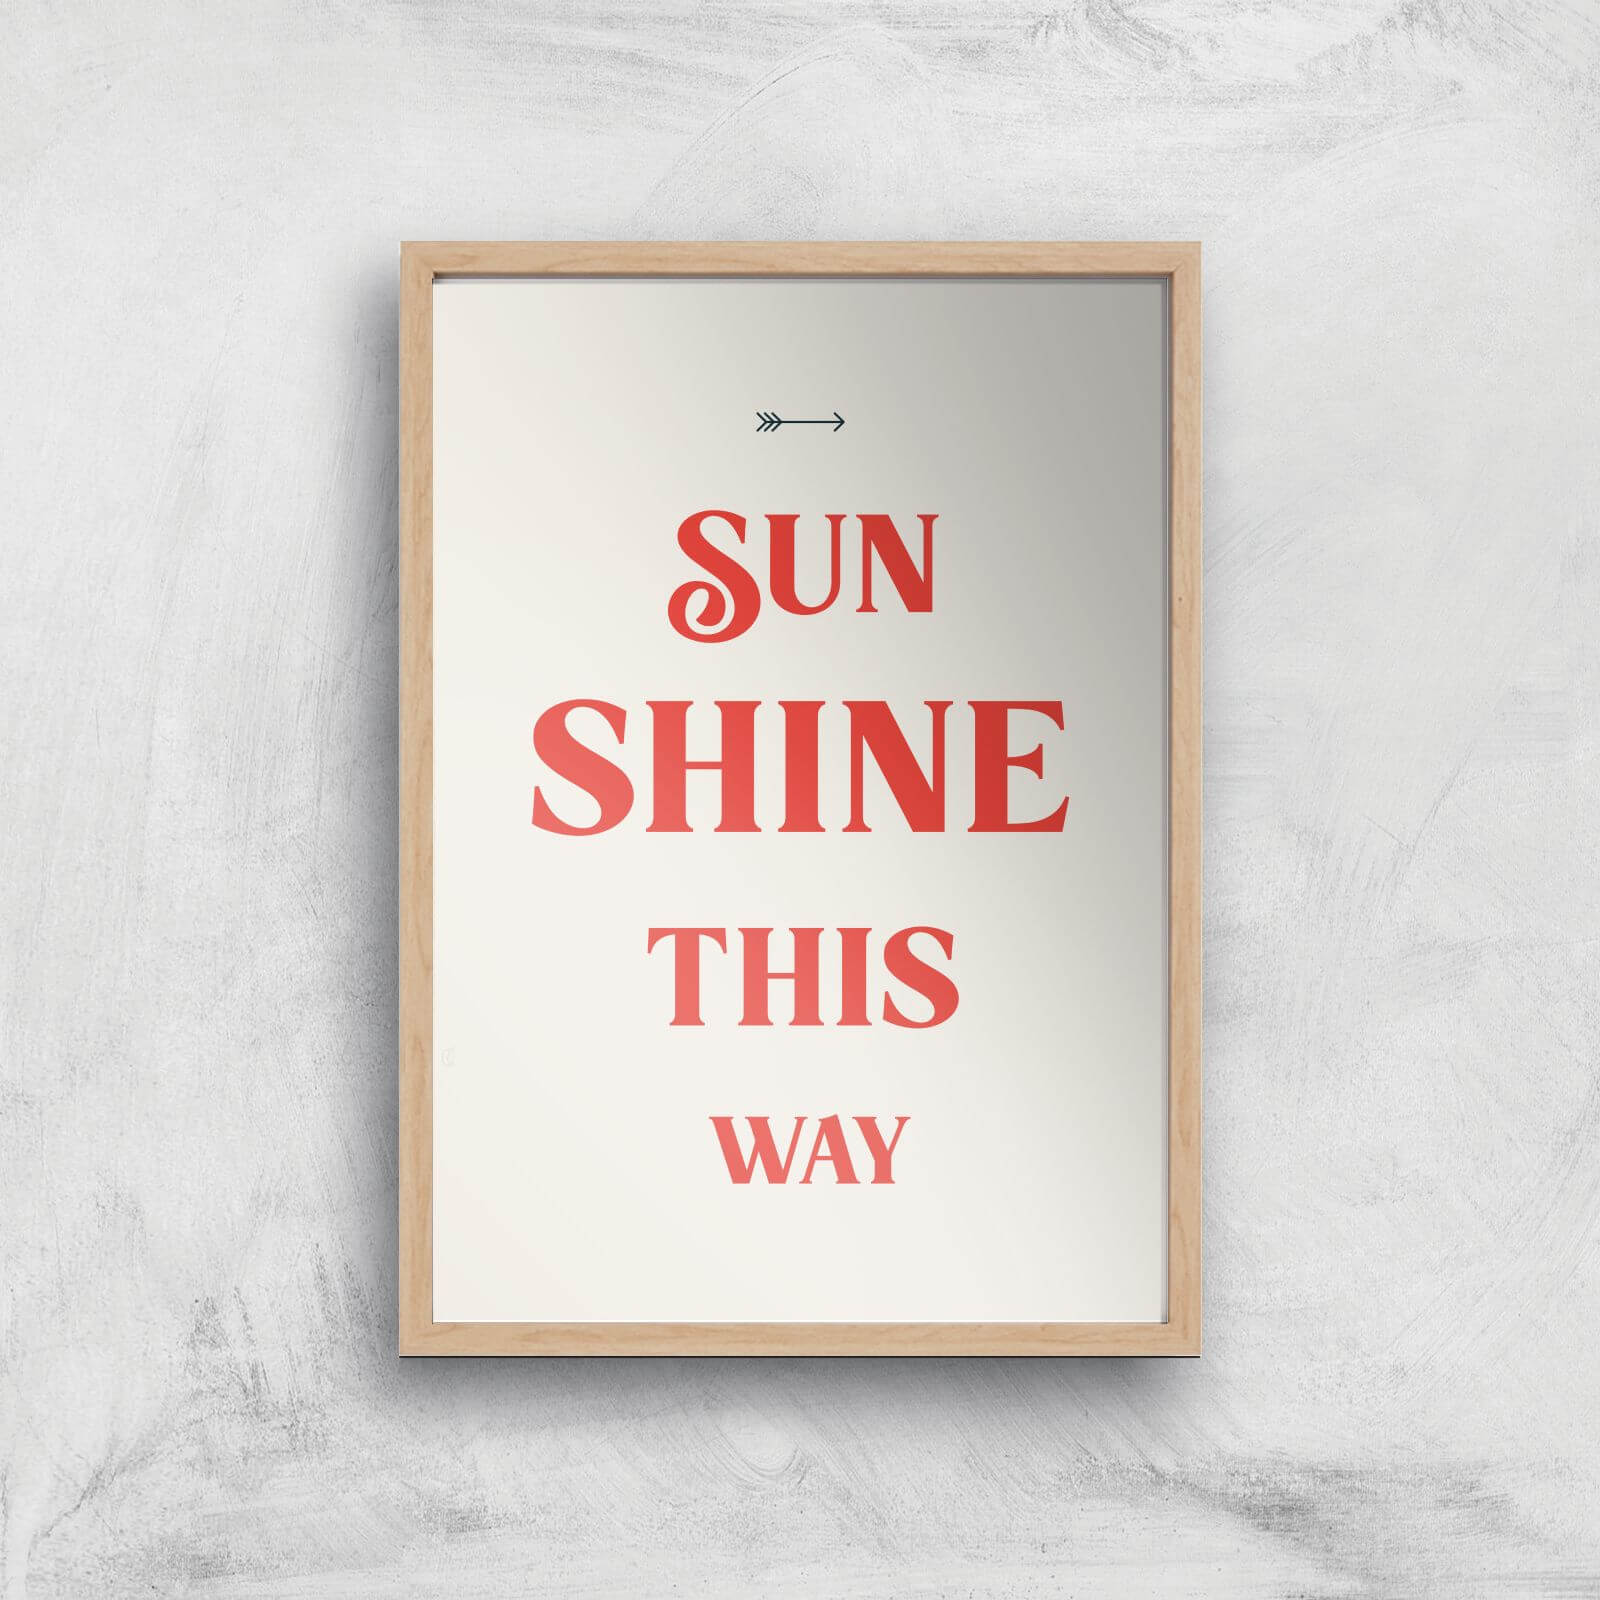 Hermione Chantal Sunshine This Way Giclee Art Print - A3 - Wooden Frame